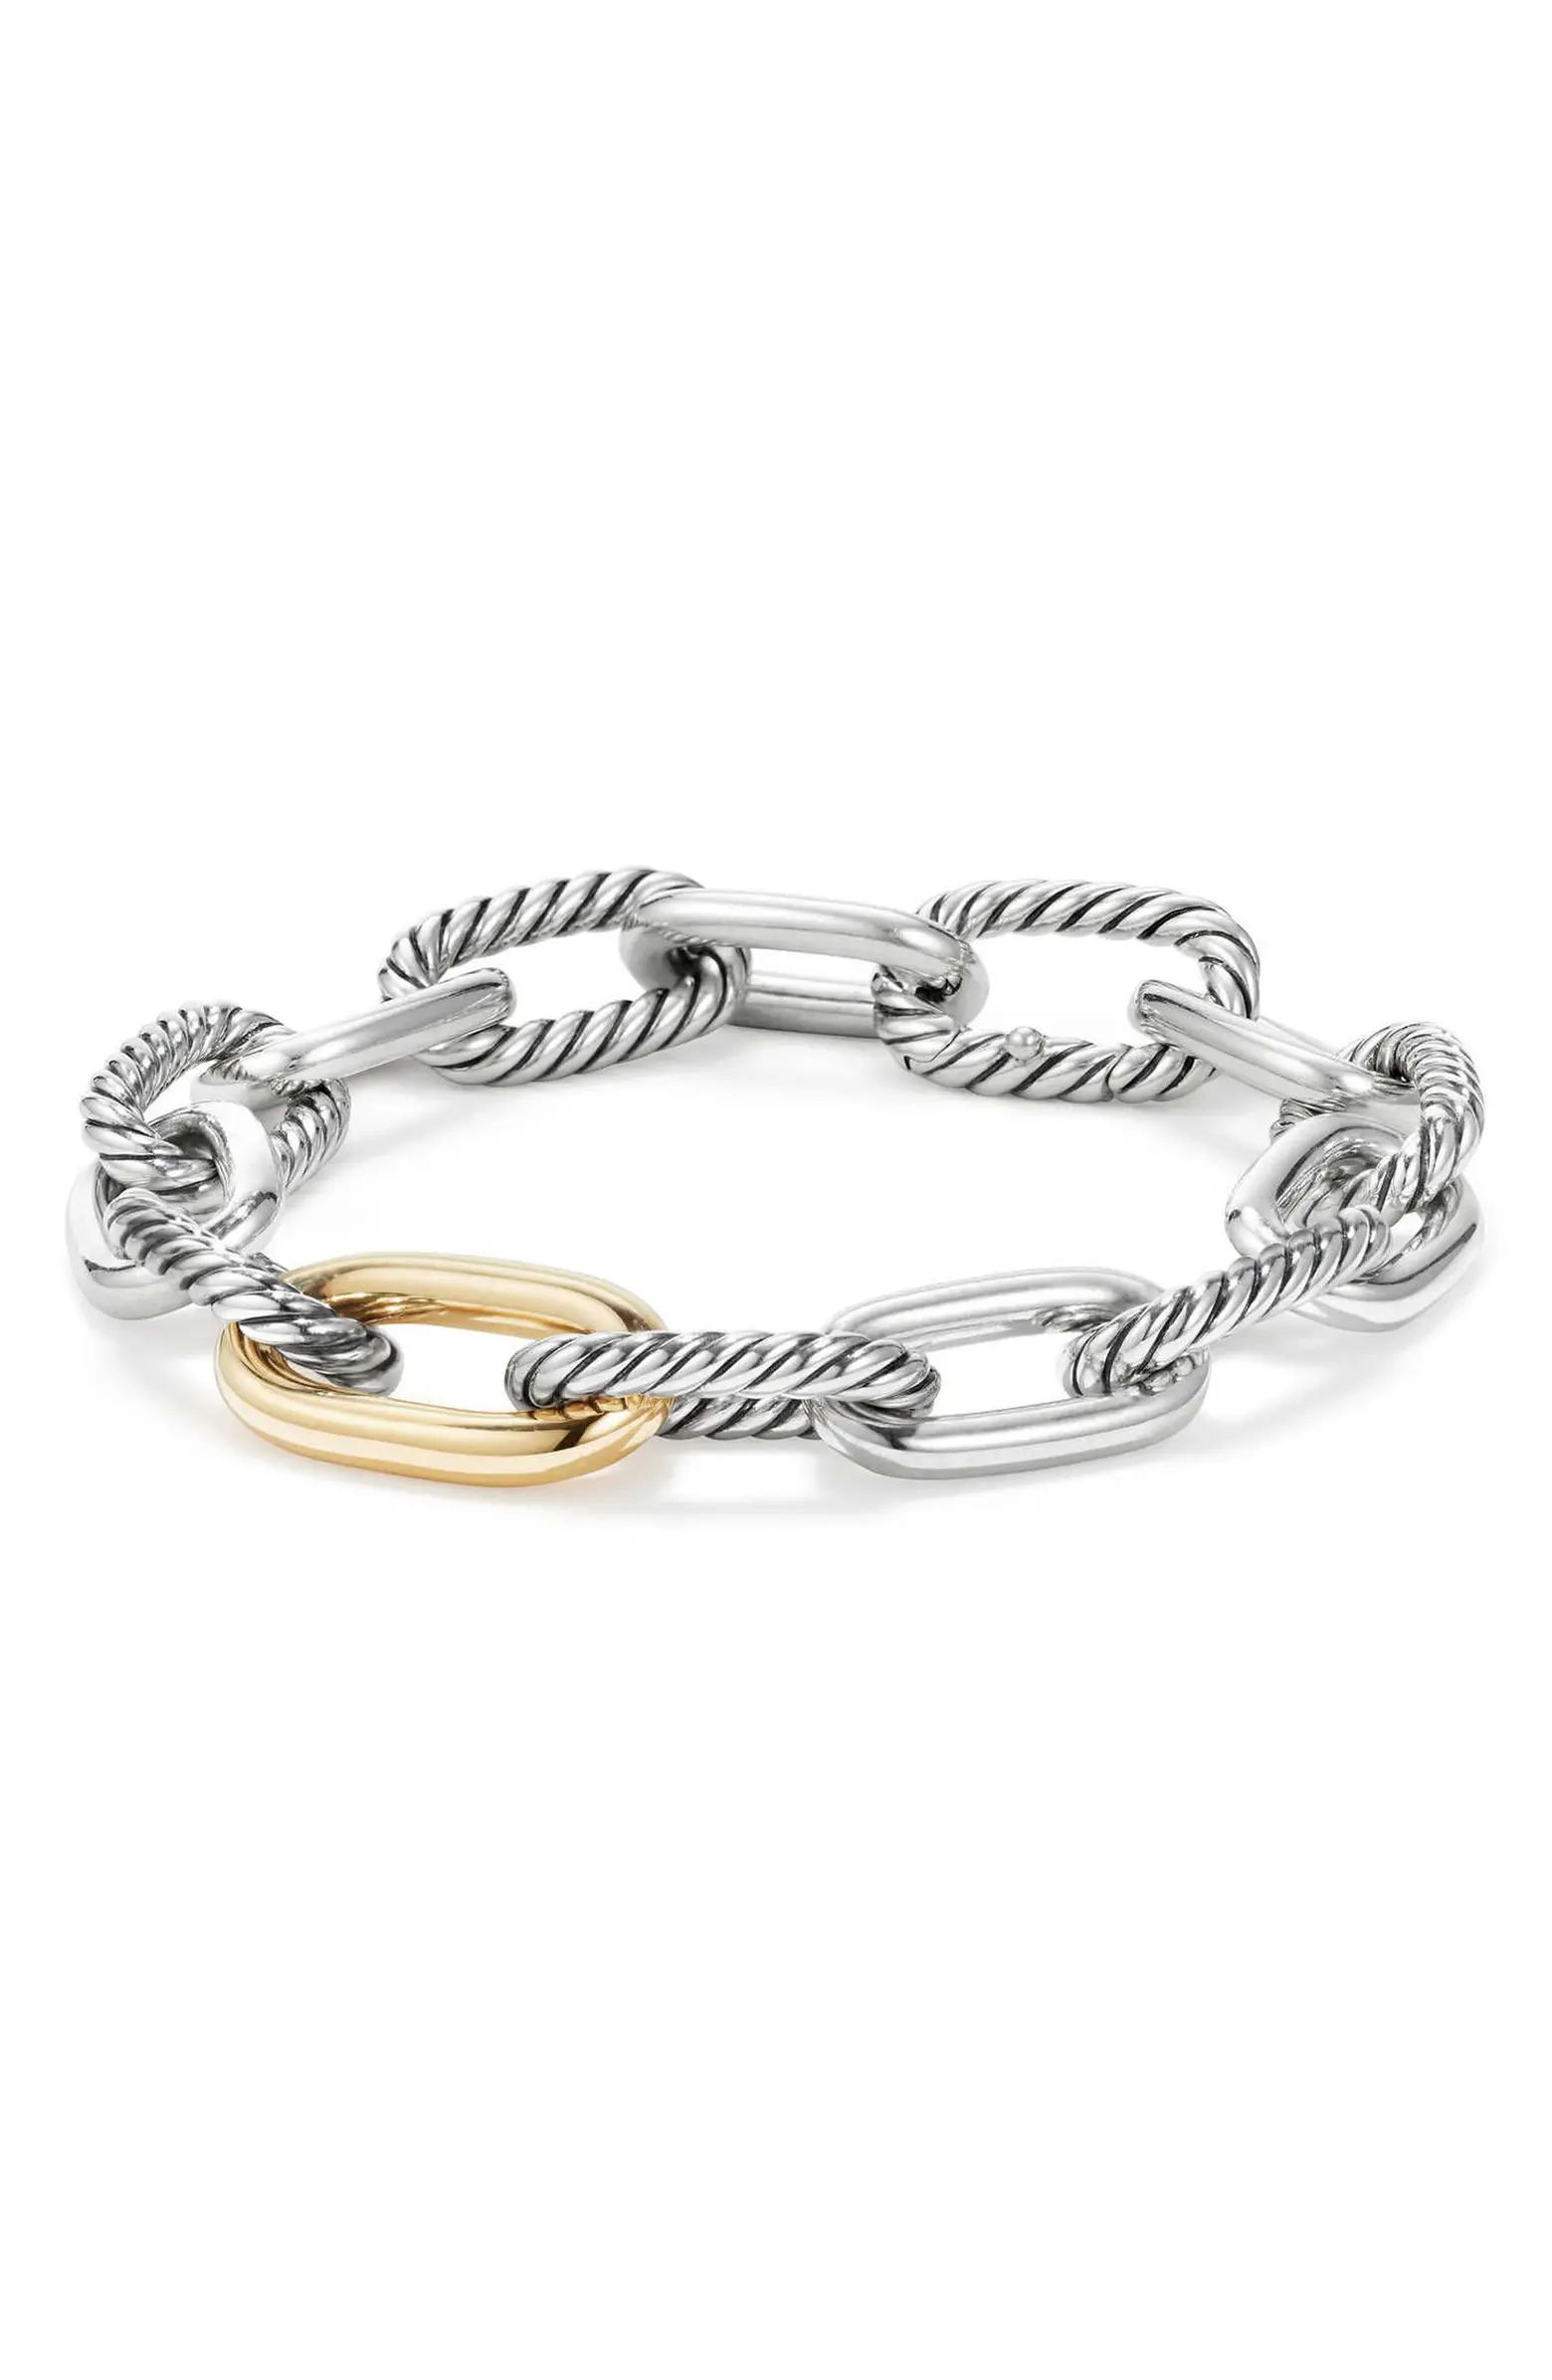 David Yurman DY Madison Chain in Silver with 18K Gold Bracelet, 11mm | Nordstrom | Nordstrom